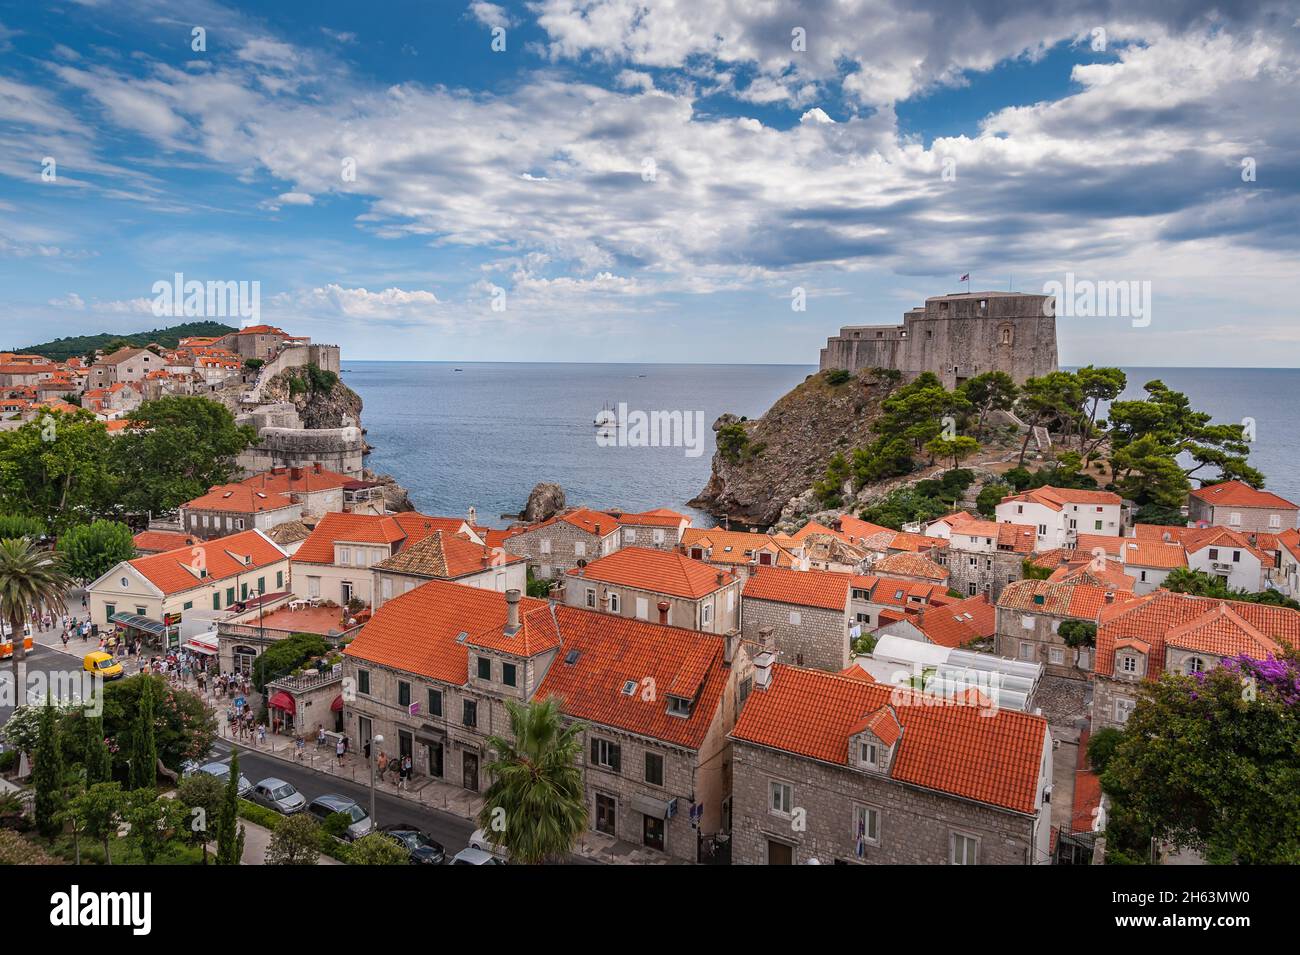 Dubrovnik castle and city overlook Stock Photo